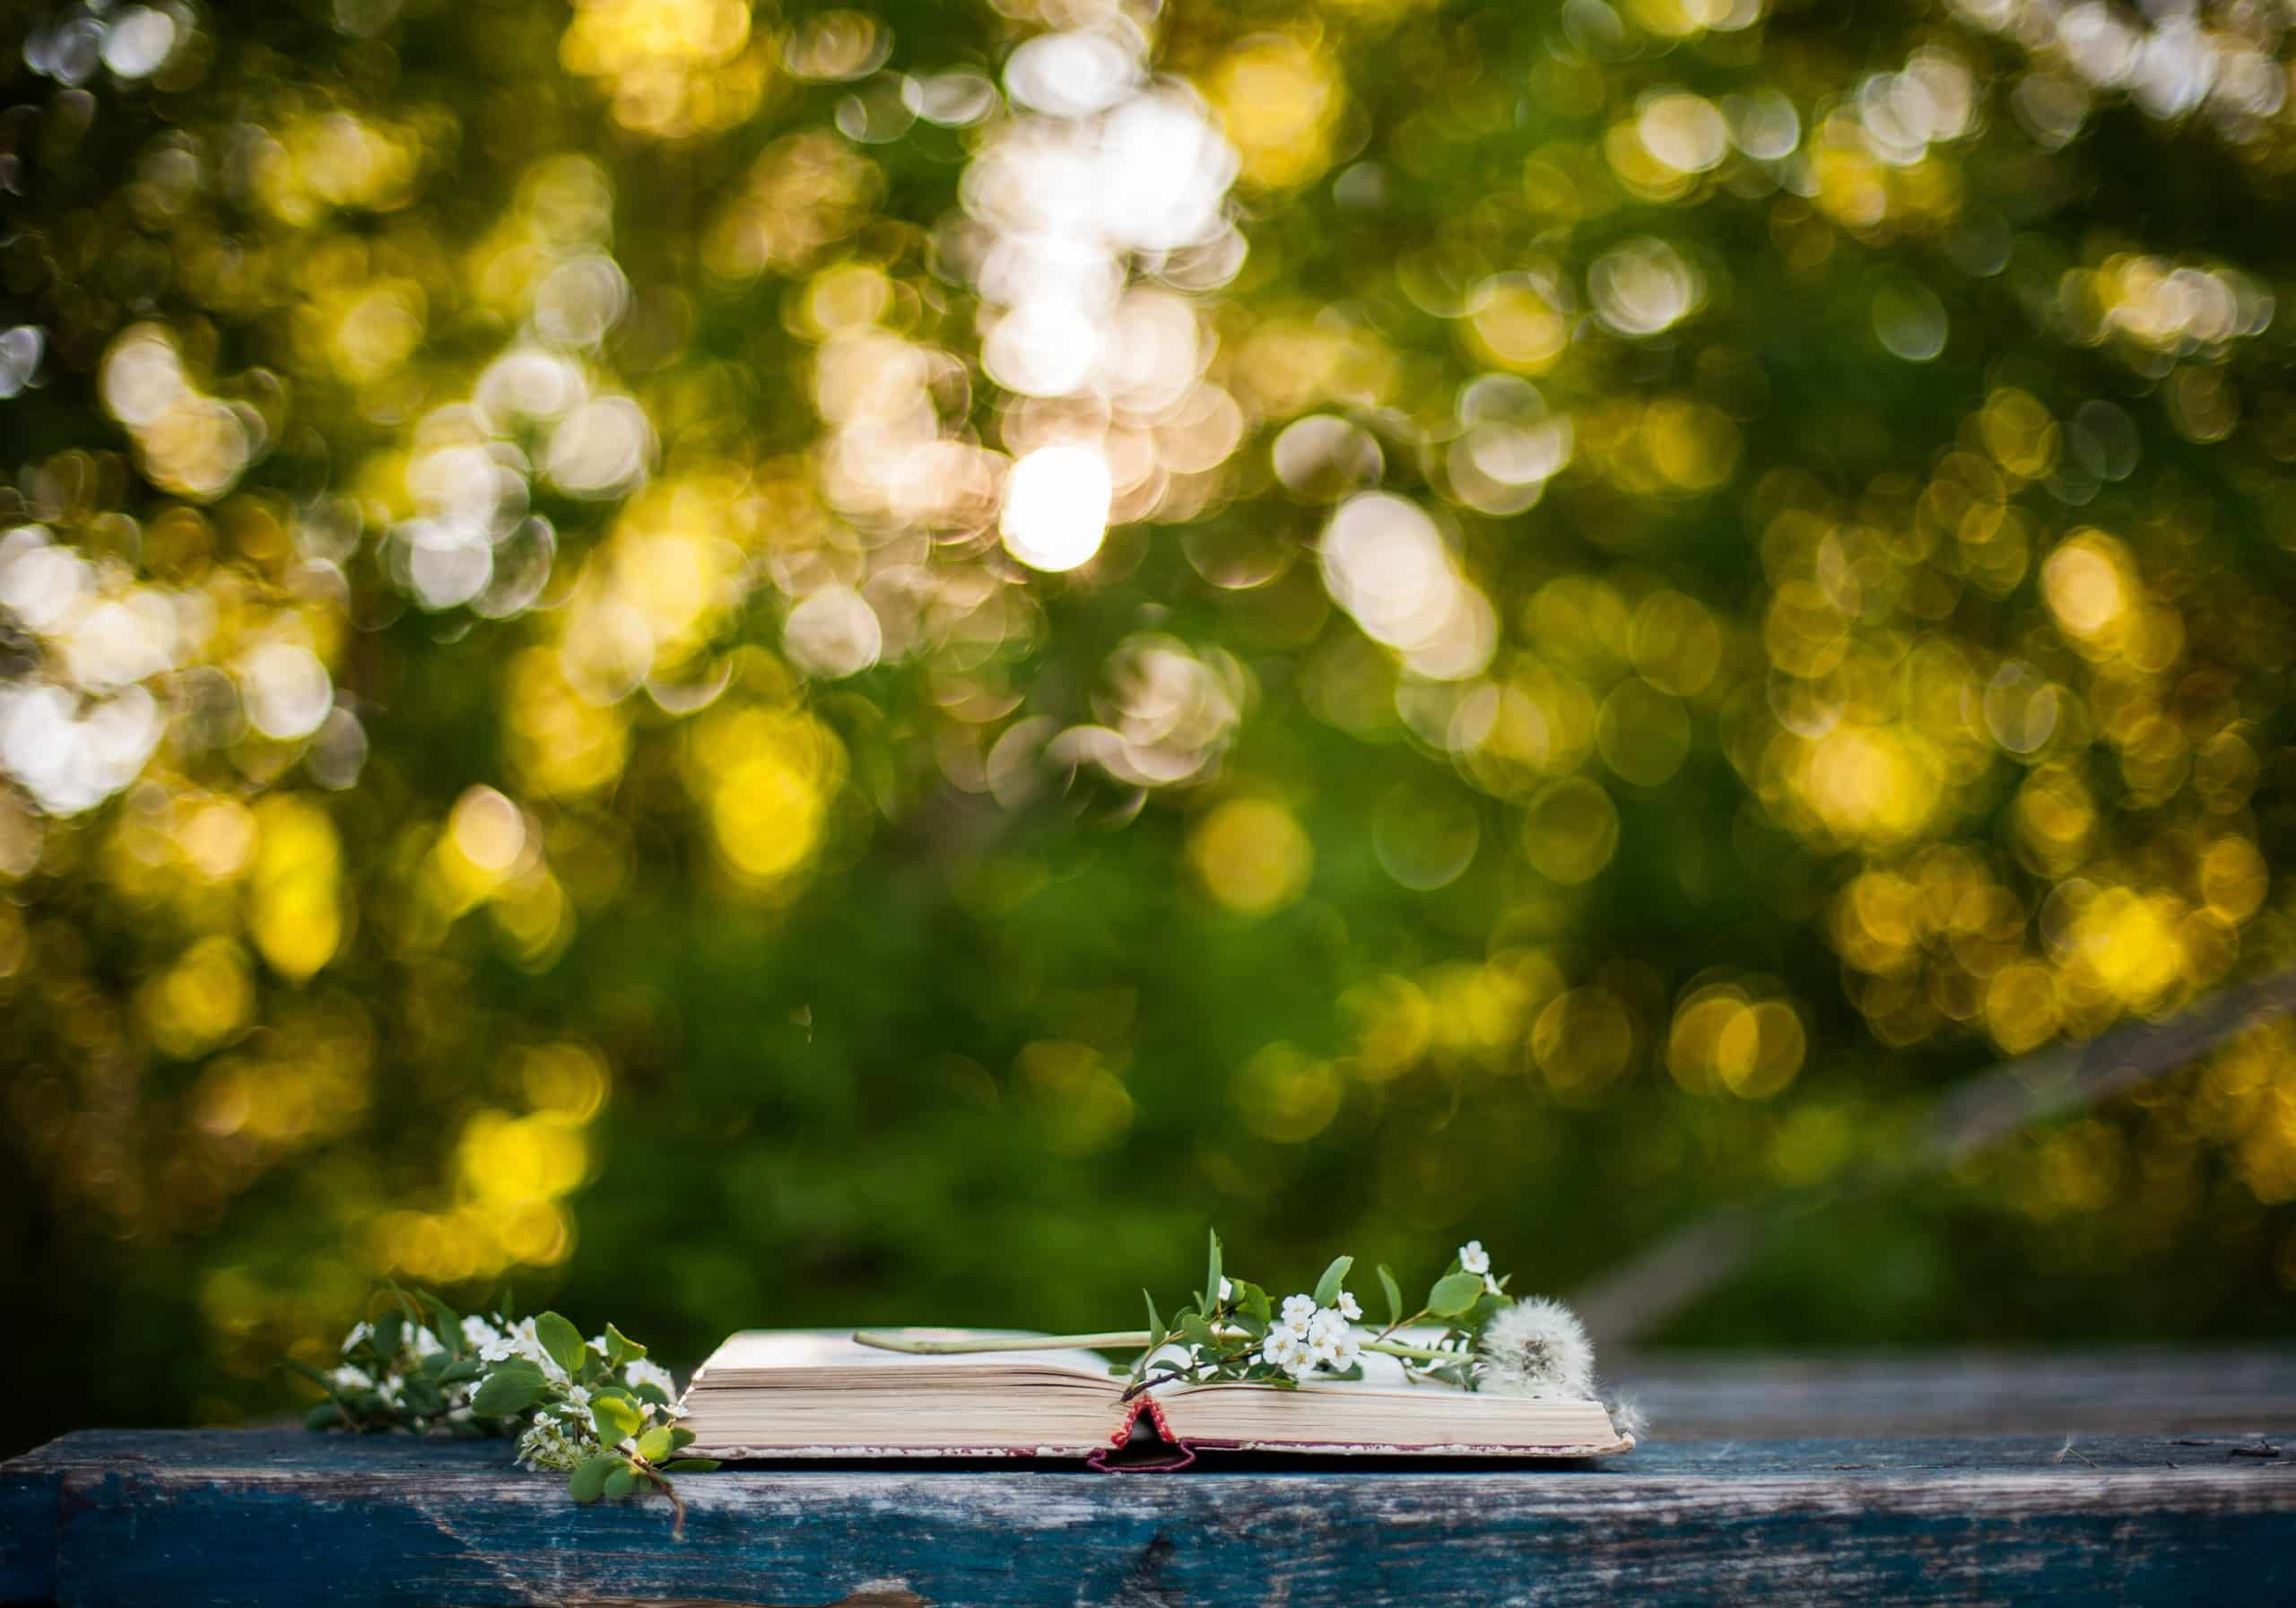 Poetry book lying on wooden table outdoor